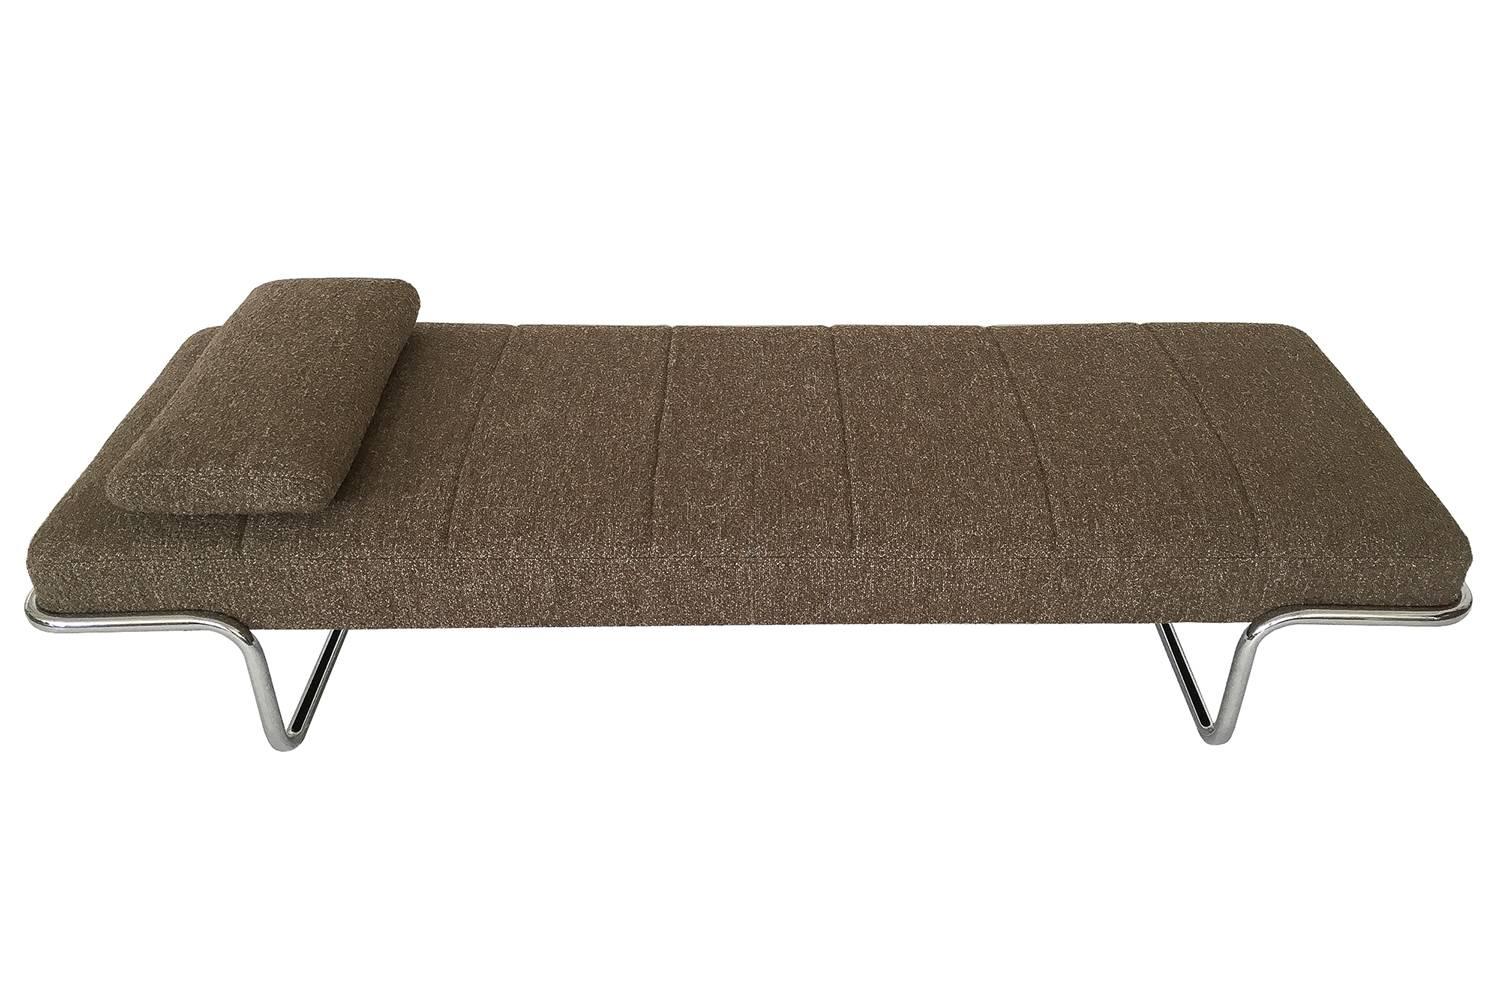 Chrome framed daybed or bench by Brayton International, circa 1970s. Newly upholstered in a natural heathered wool bouclé fabric in a mushroom brown color. Tight upholstered seat with original channeled design. Loose removable matching upholstered